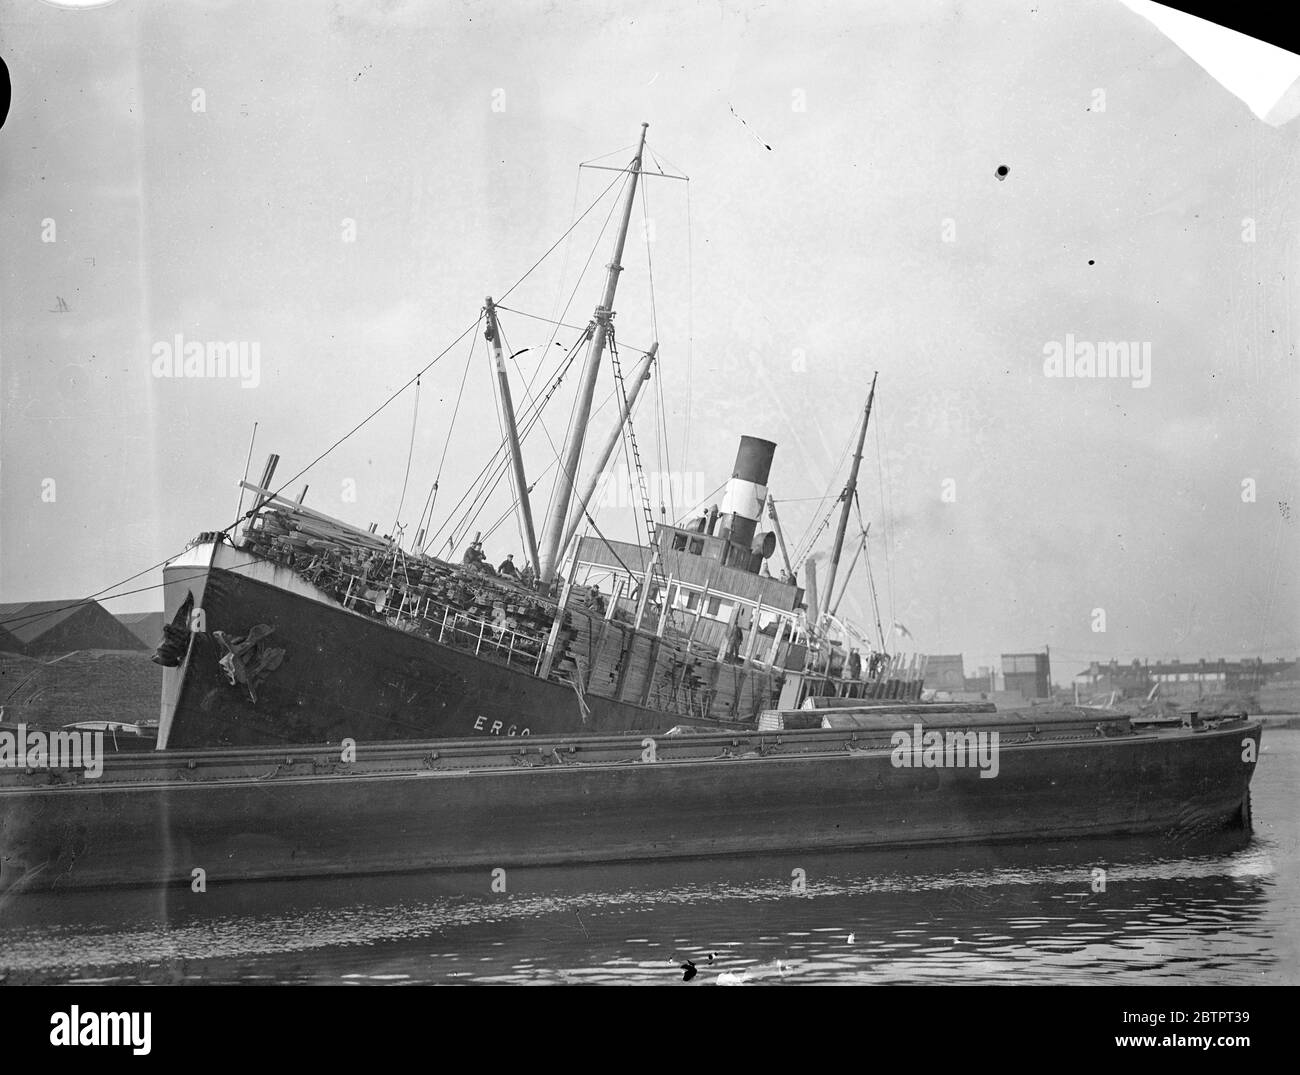 Import with a heavy list. Finnish steamer supported by barges in Surrey docks. Making her way up river with a heavy list, the Finnish timber steamer 'Ergo' reached the Surrey commercial docks, London, and had to be supported by barges. She was carrying a deck cargo of timber.. 28 October 1937 Stock Photo